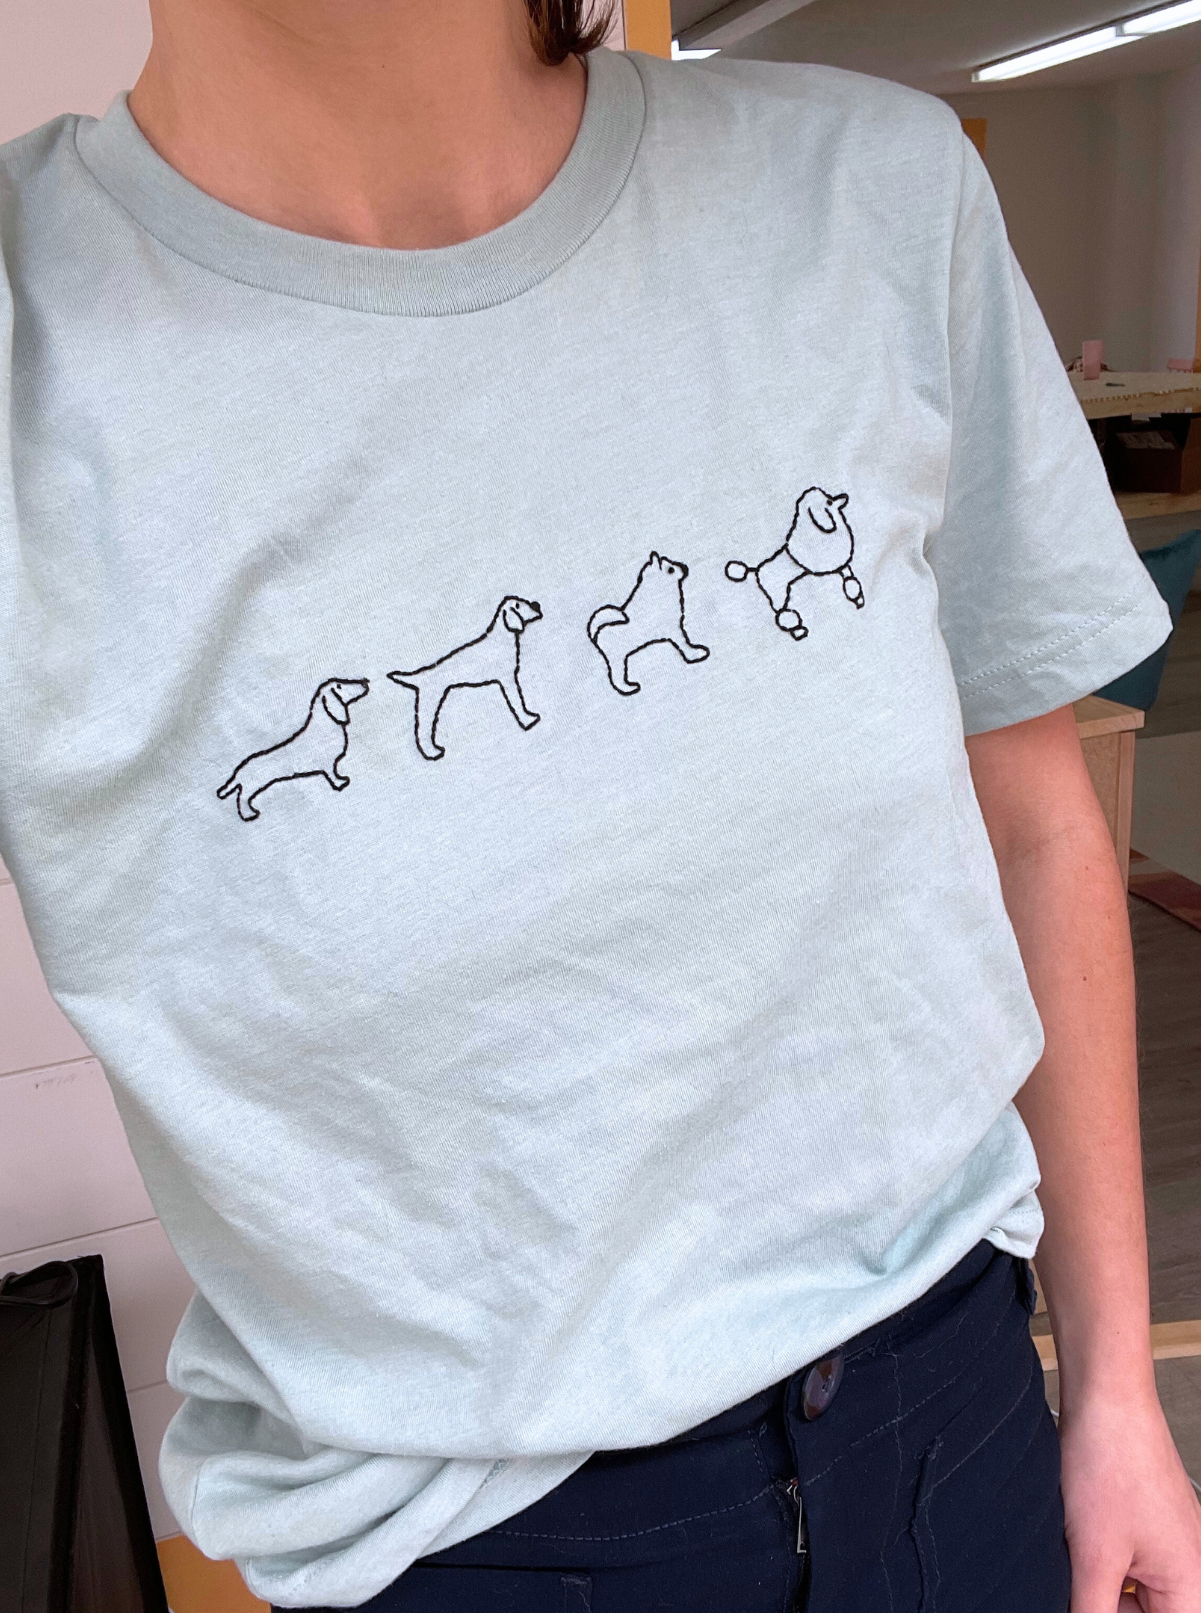 Beginner Embroidery Tee Shirt Project: Pup Pattern